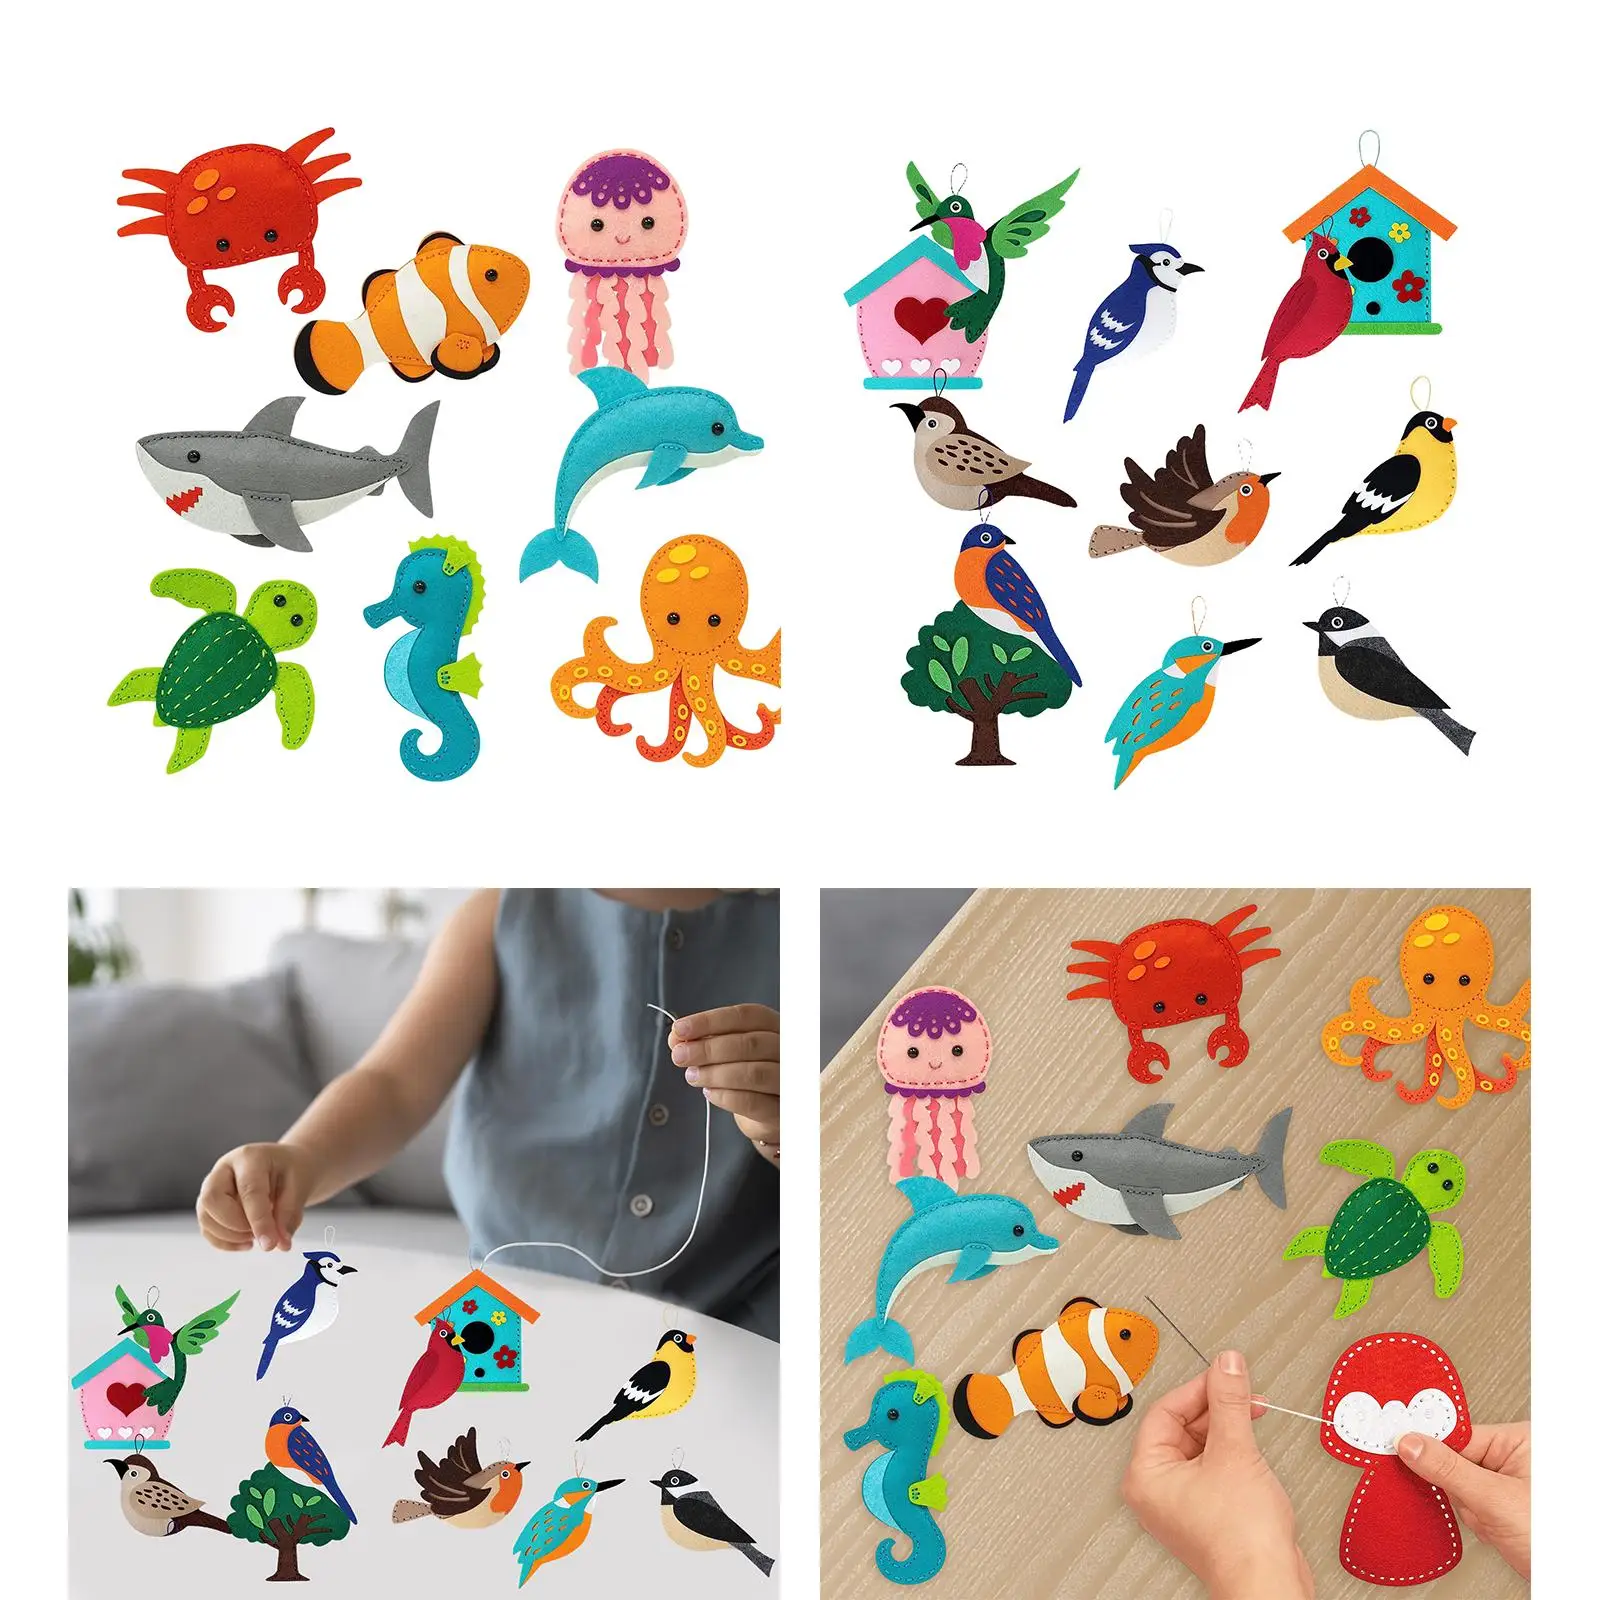 Felt Sewing Kits Fish and Birds DIY Crafting and Sewing Set Animals Sewing for kids Boys Children Toddler